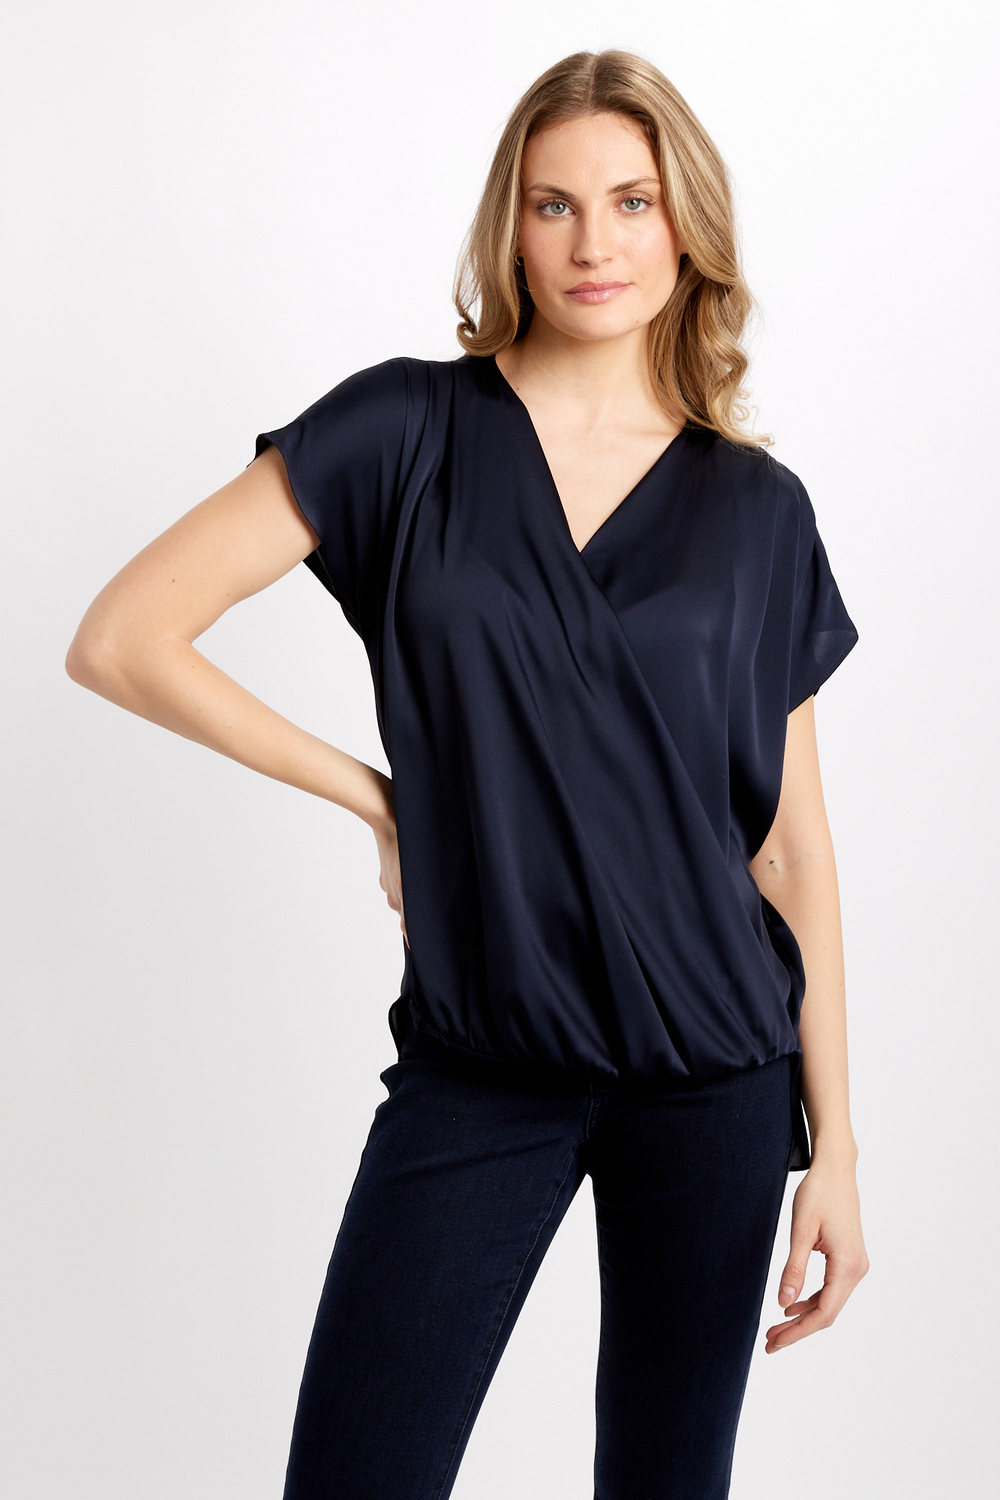 Wrap Front Satin Top Style 241278. Midnight Blue